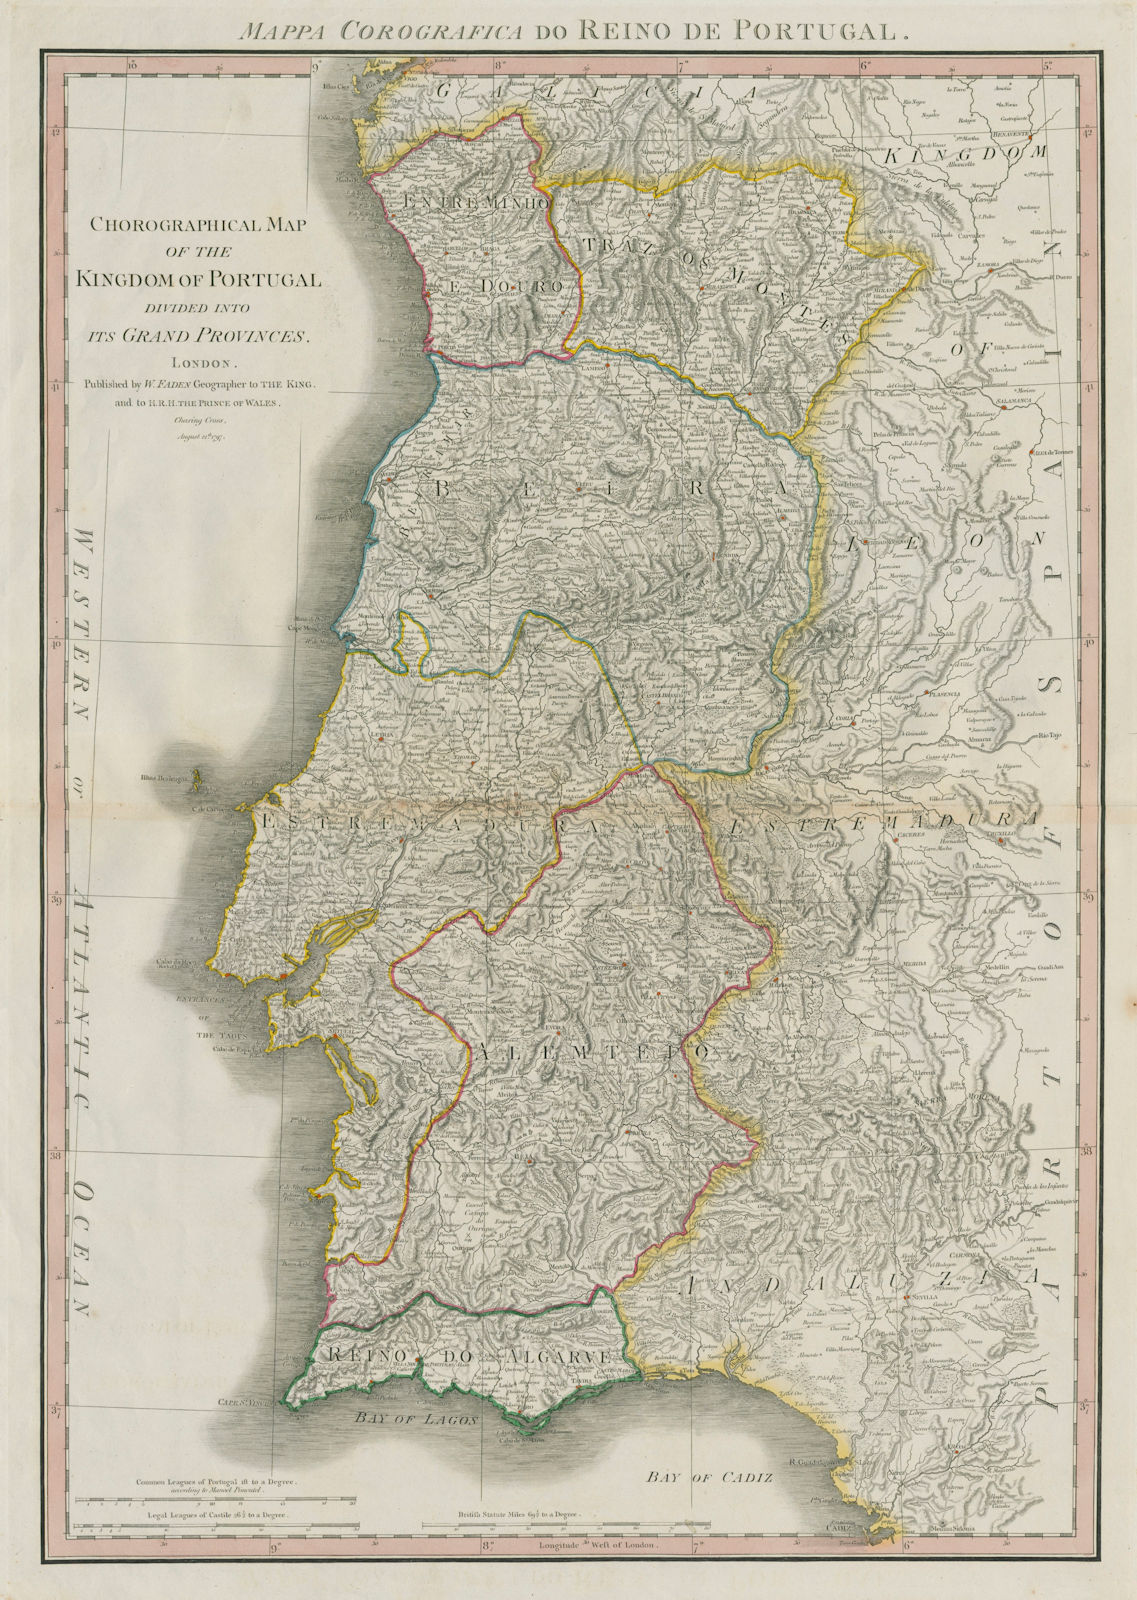 Chorographical map of the Kingdom of Portugal… in provinces. FADEN 1797